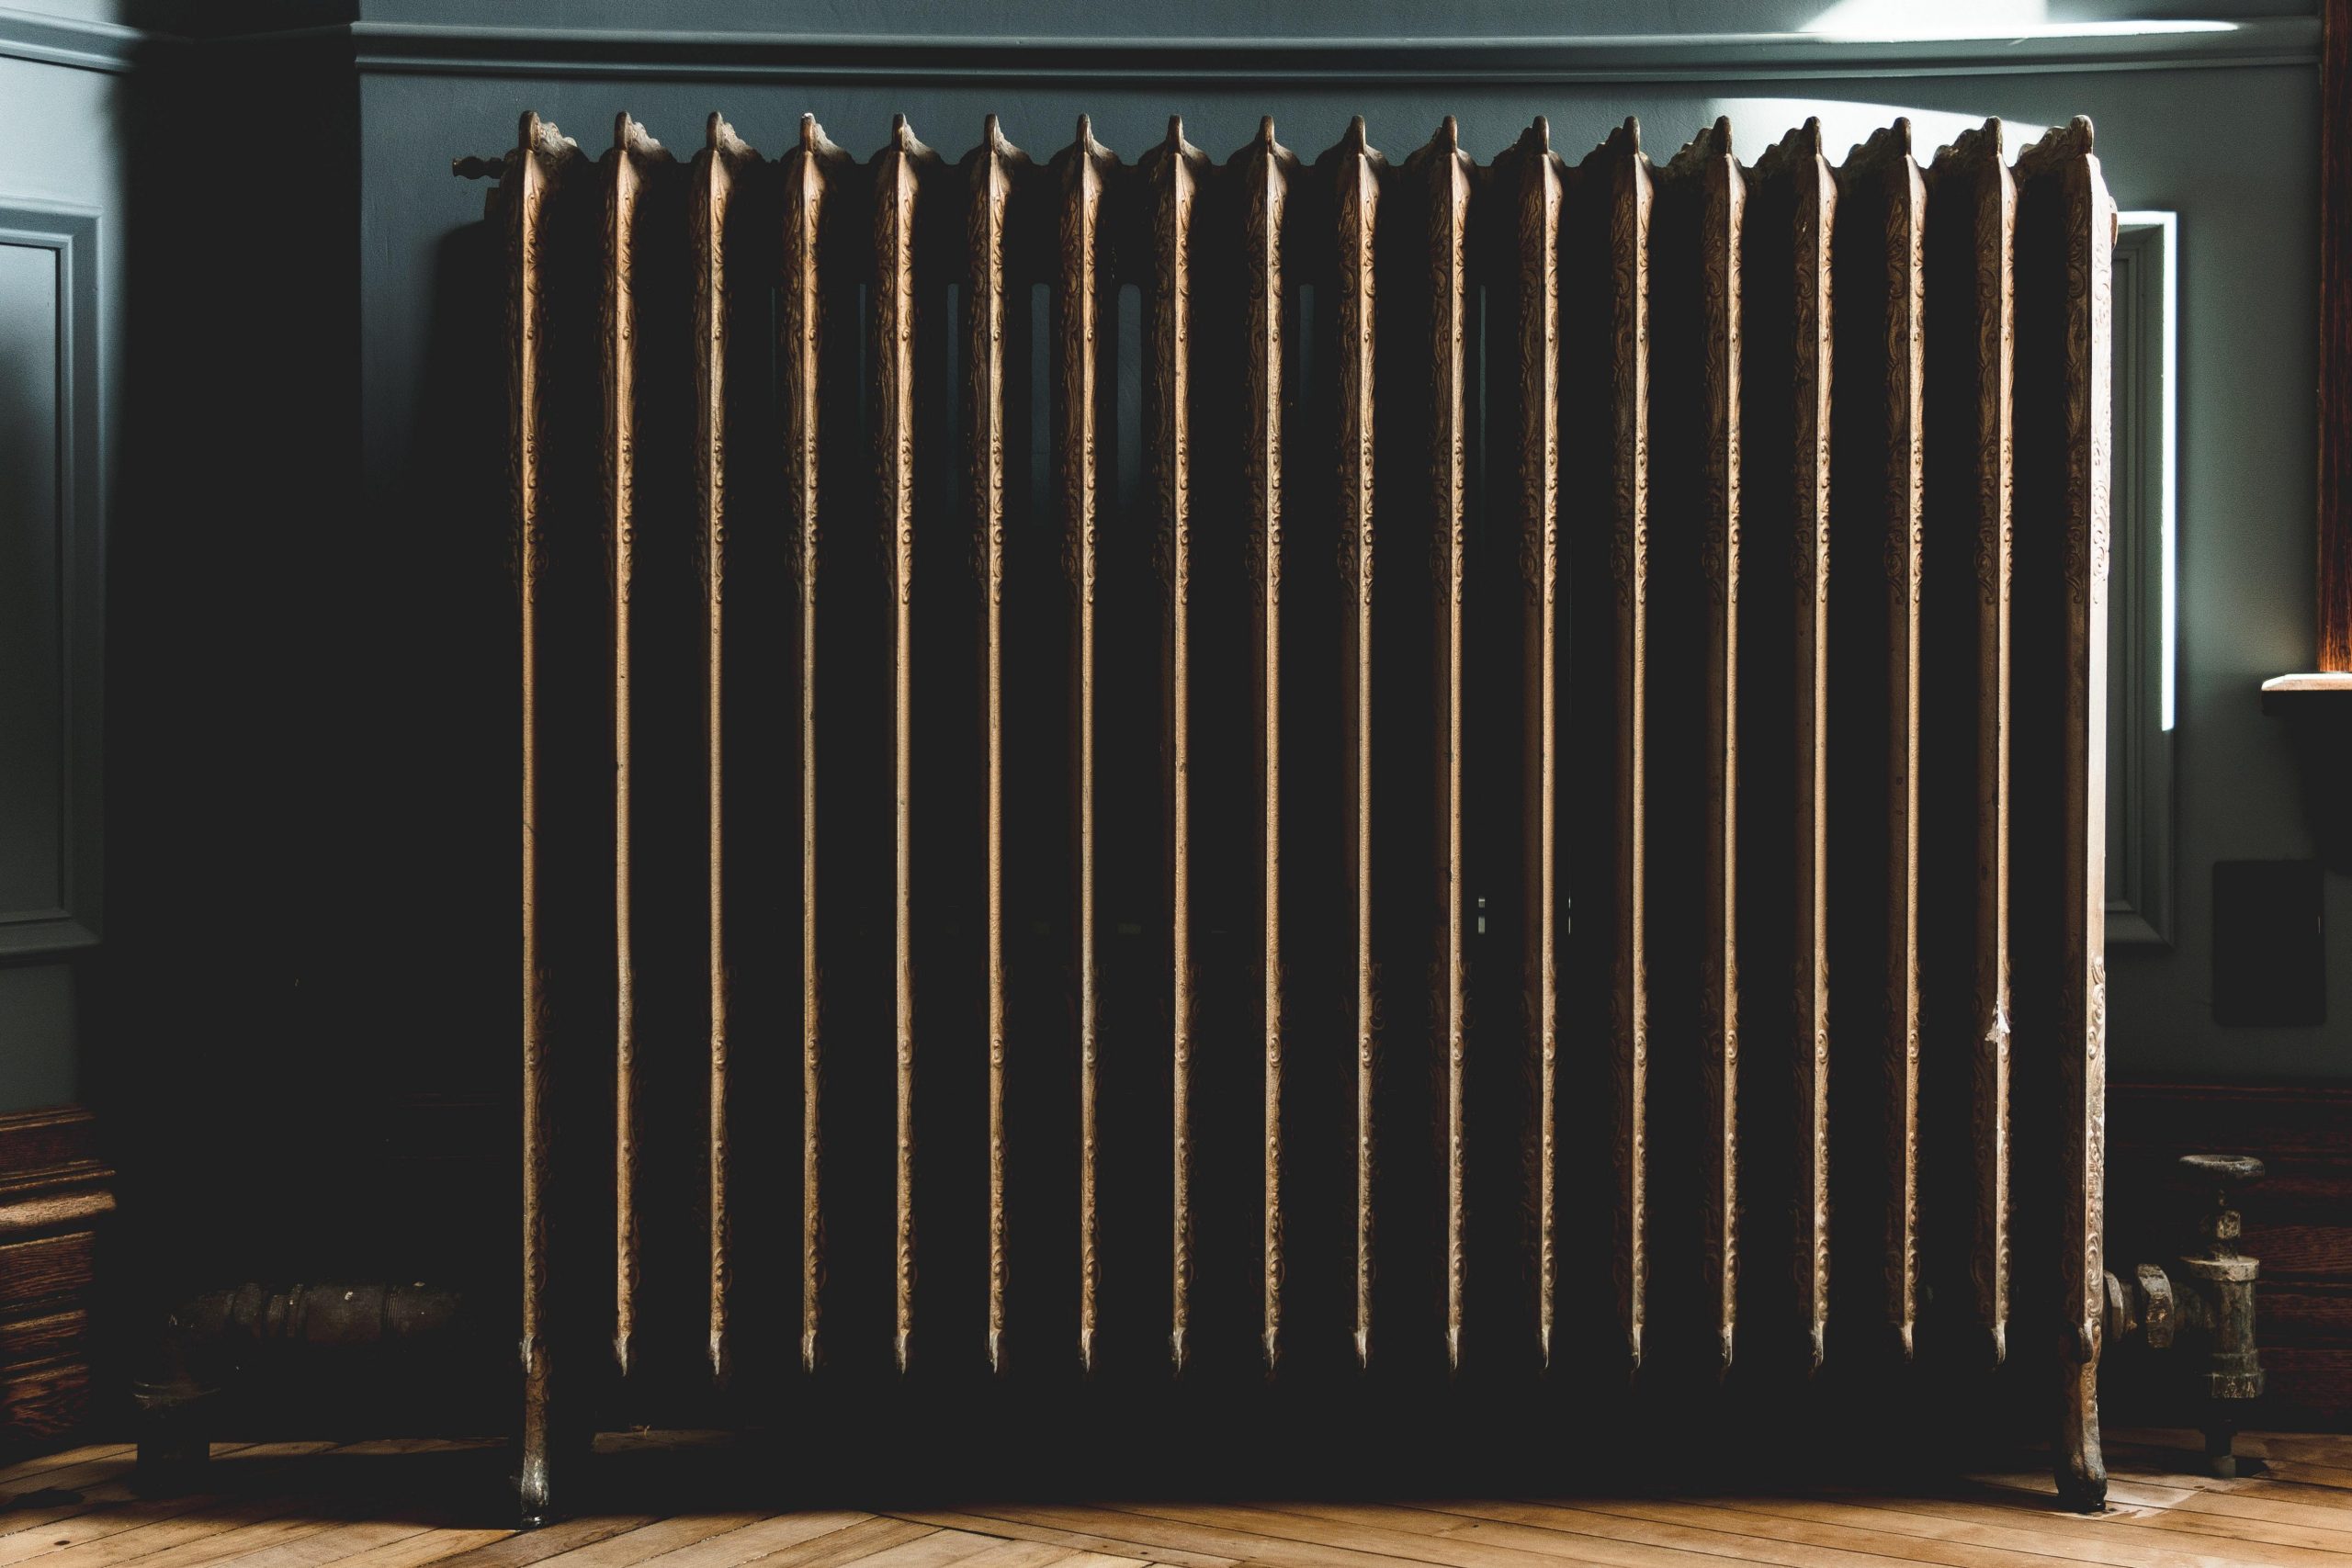 What Are 3 Ways That You Can Tell if Your Heater Is Energy-Efficient?